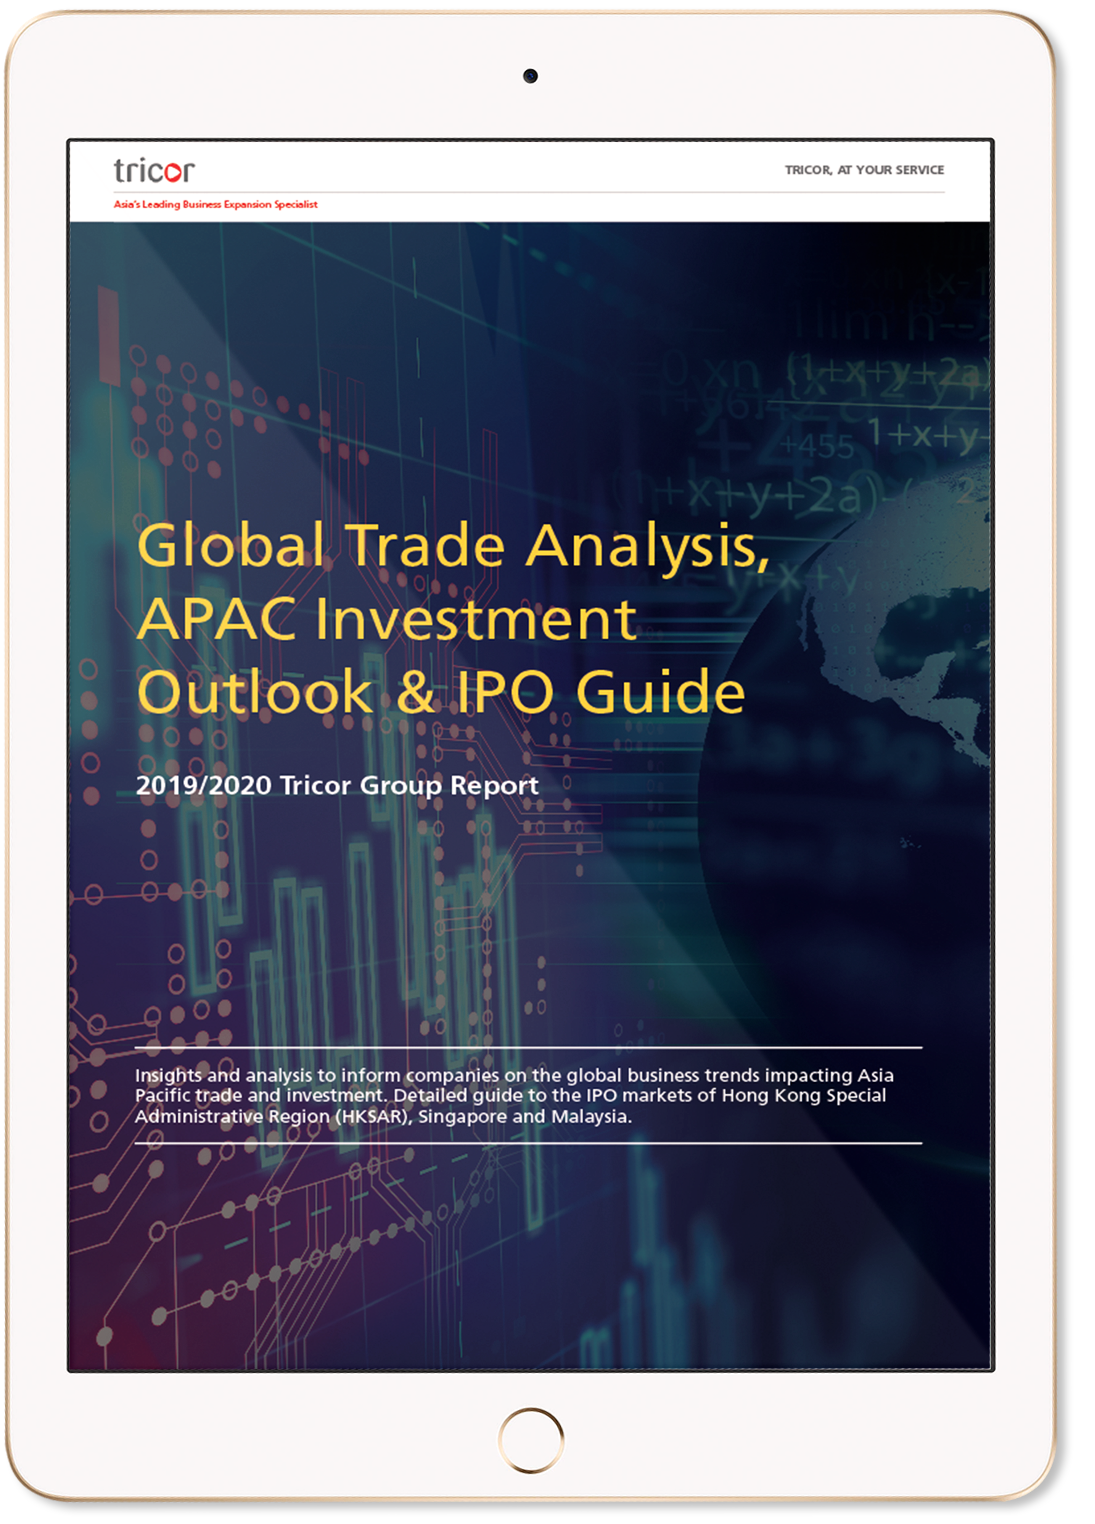 Global Trade Analysis, APAC Investment Outlook & IPO Guide